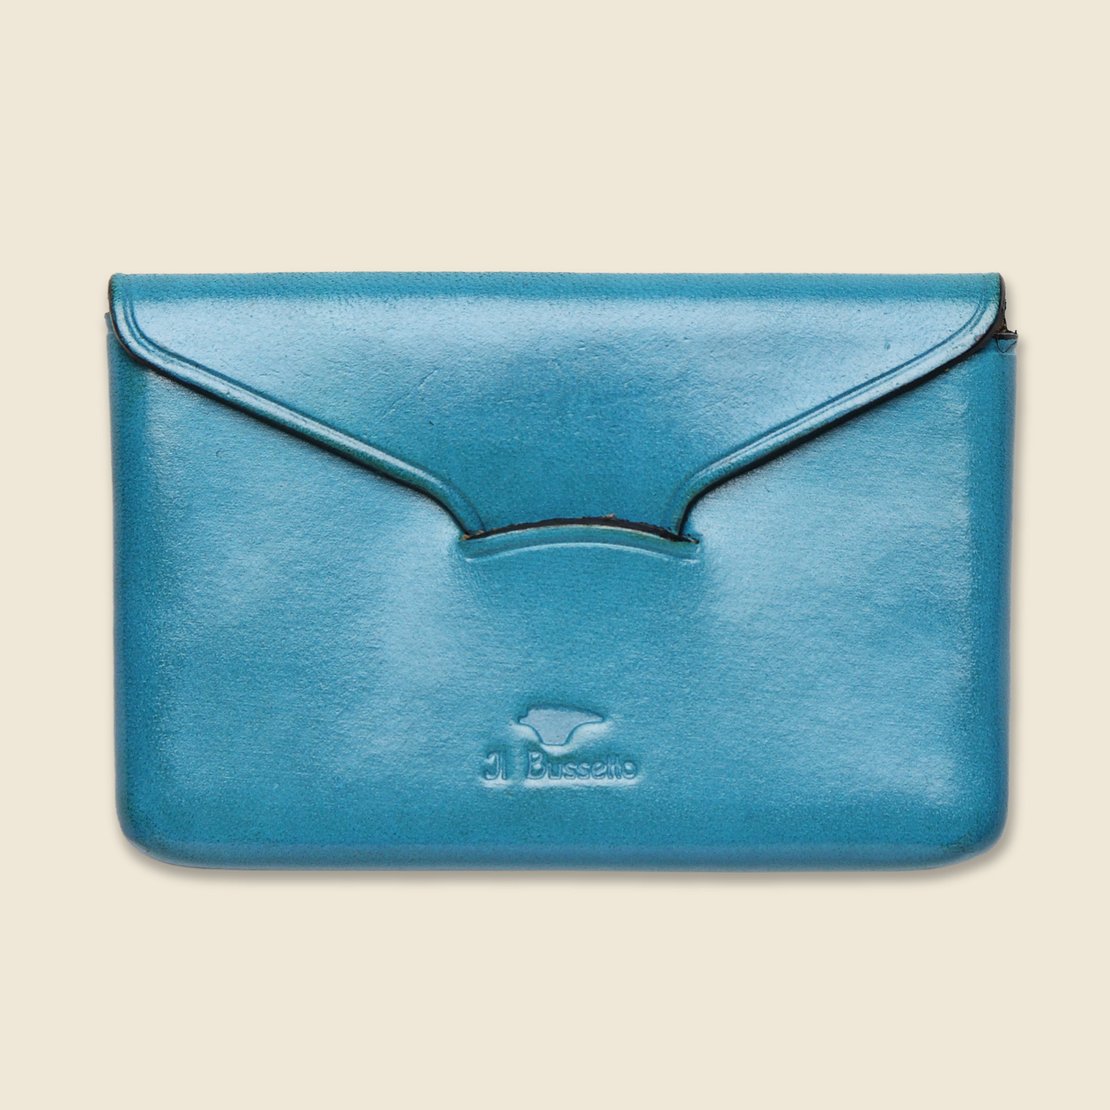 Il Bussetto Business Card Holder - Cadet Blue